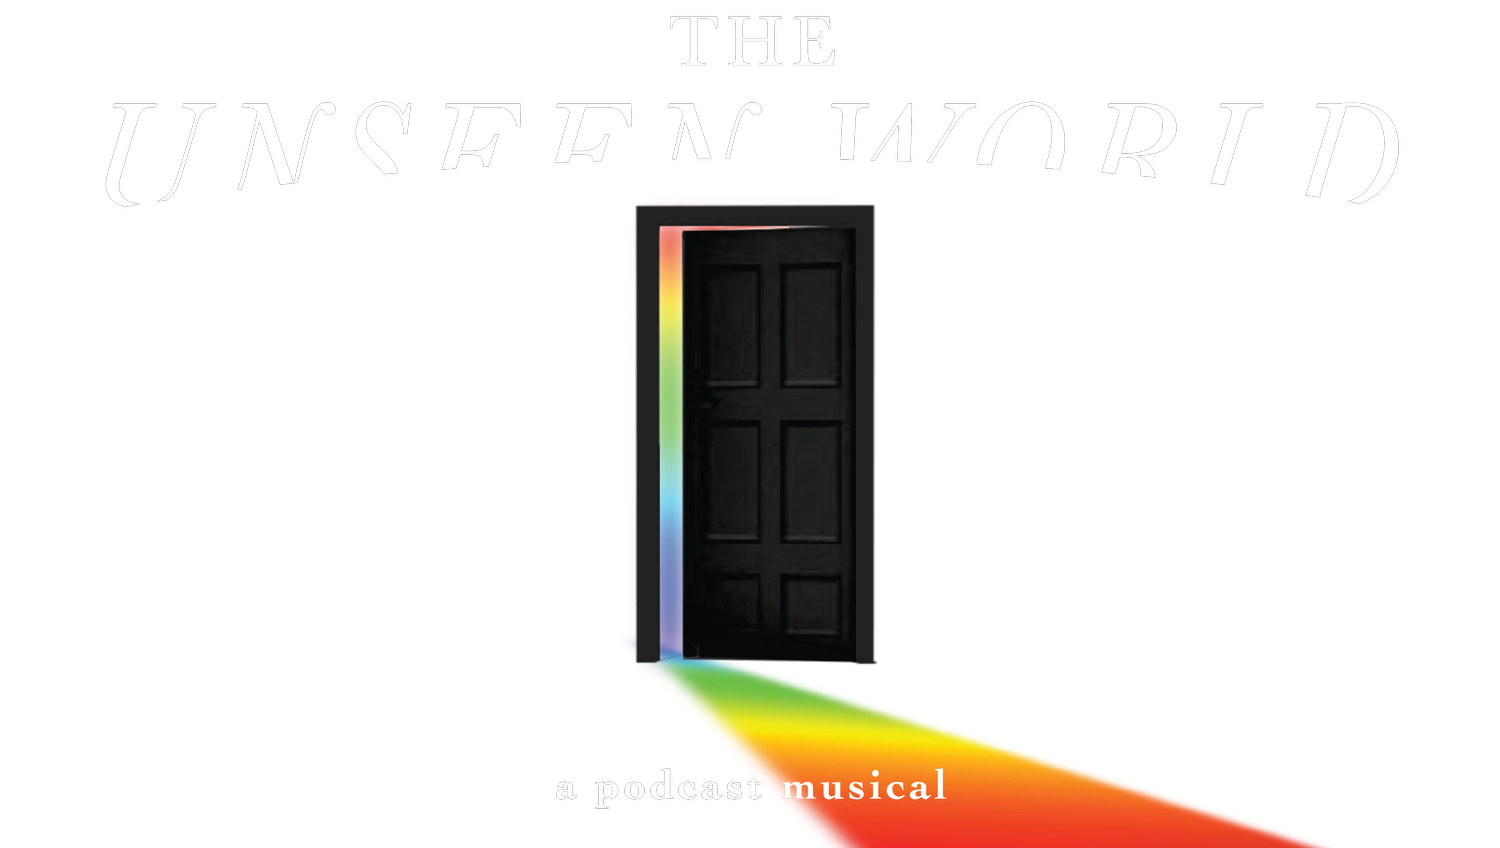 The Unseen World: A Podcast Musical